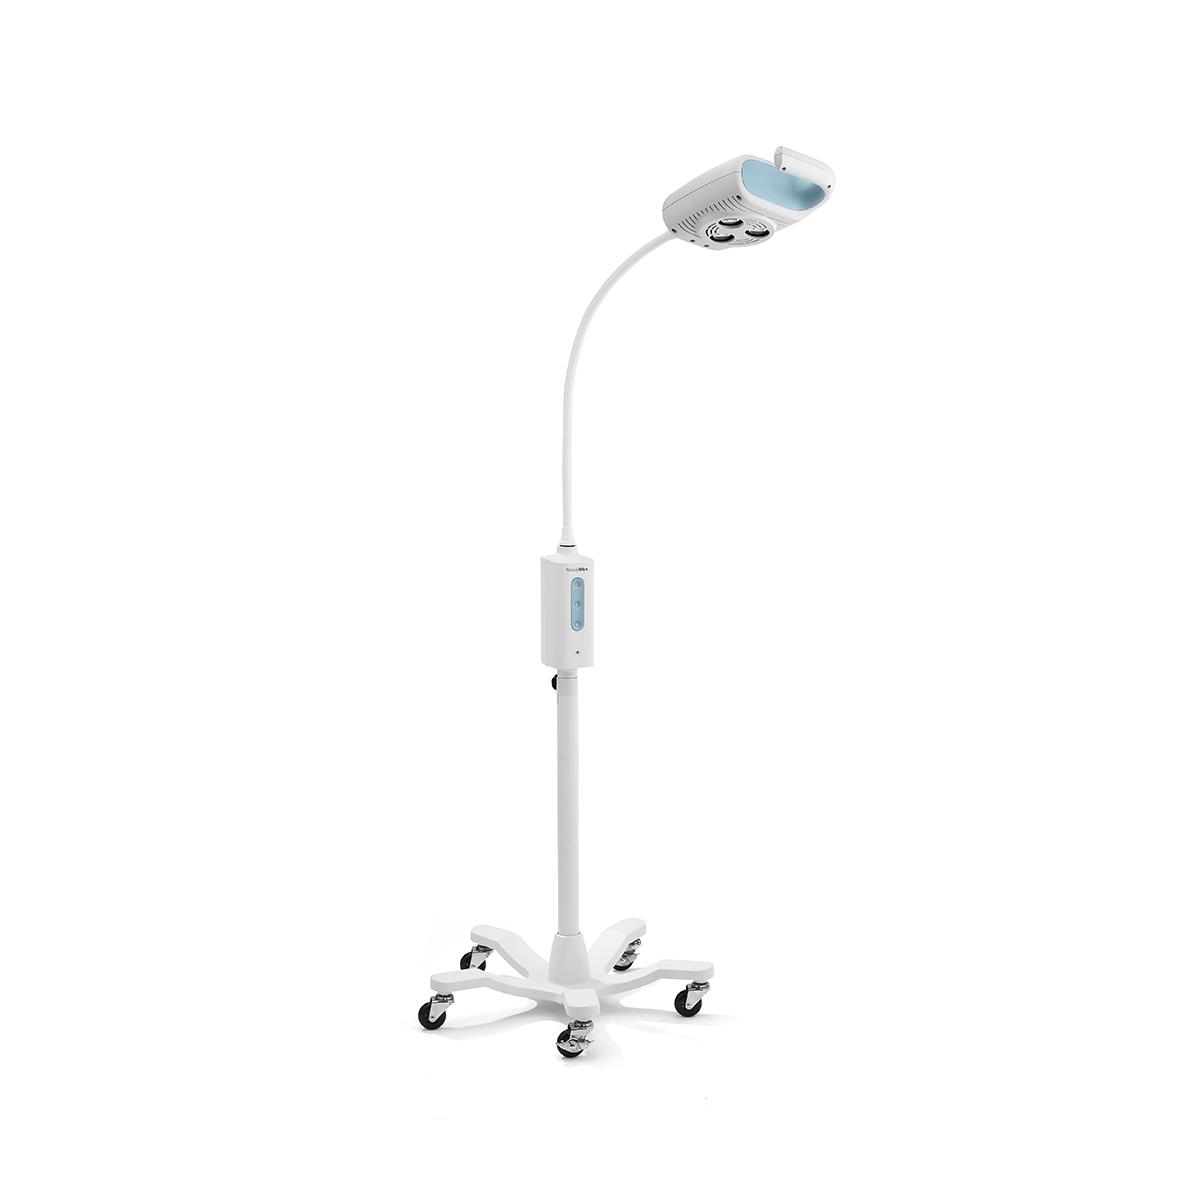 Green Series 600 Veterinary Minor Procedure Light on mobile stand with wheels, right facing